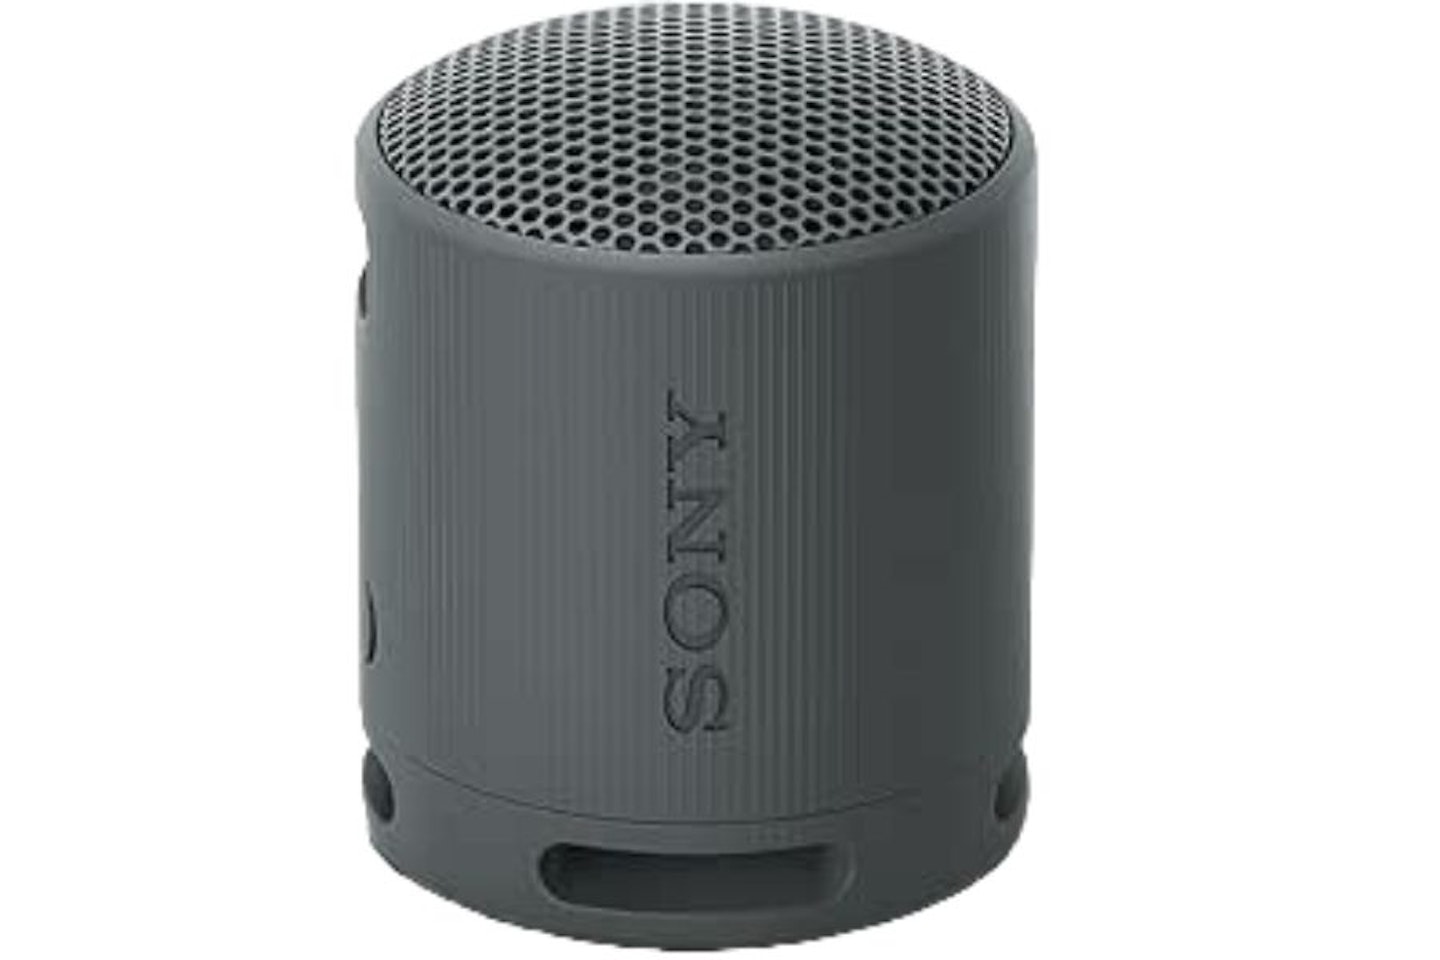 Sony SRS-XB100 - Wireless Bluetooth, Portable, Lightweight, Compact, Outdoor, Travel Speaker